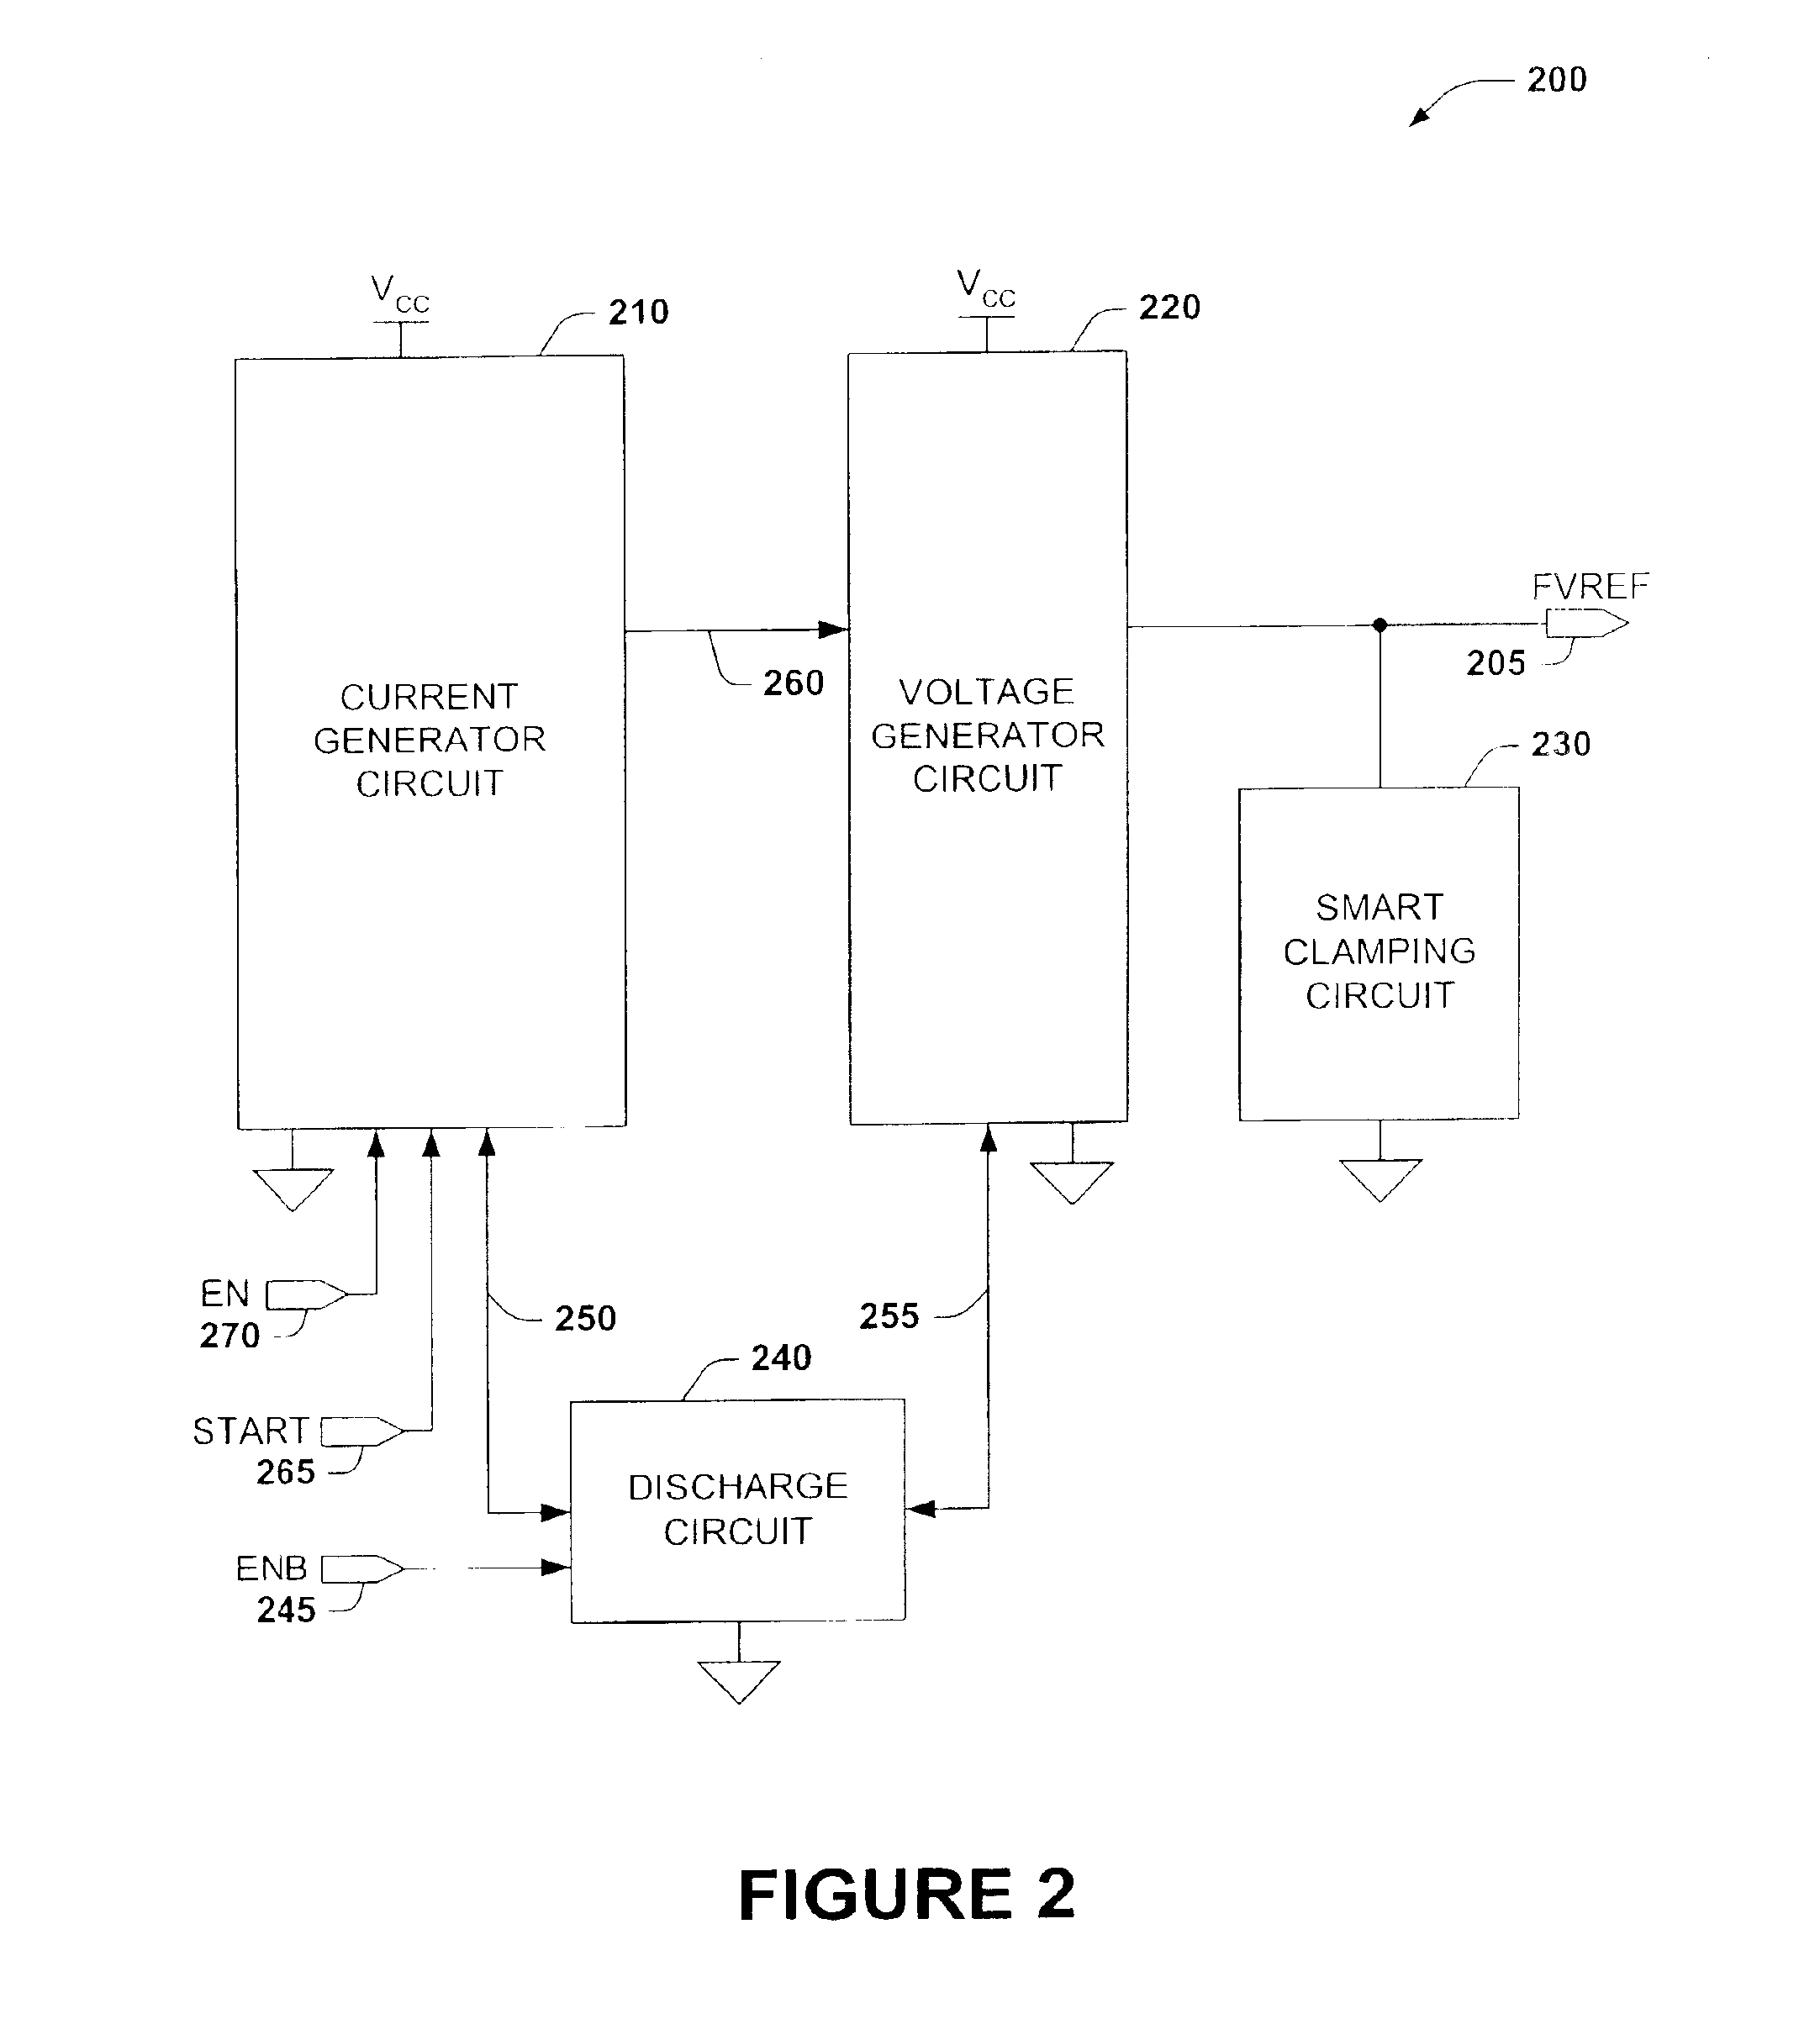 Fast bandgap reference circuit for use in a low power supply A/D booster